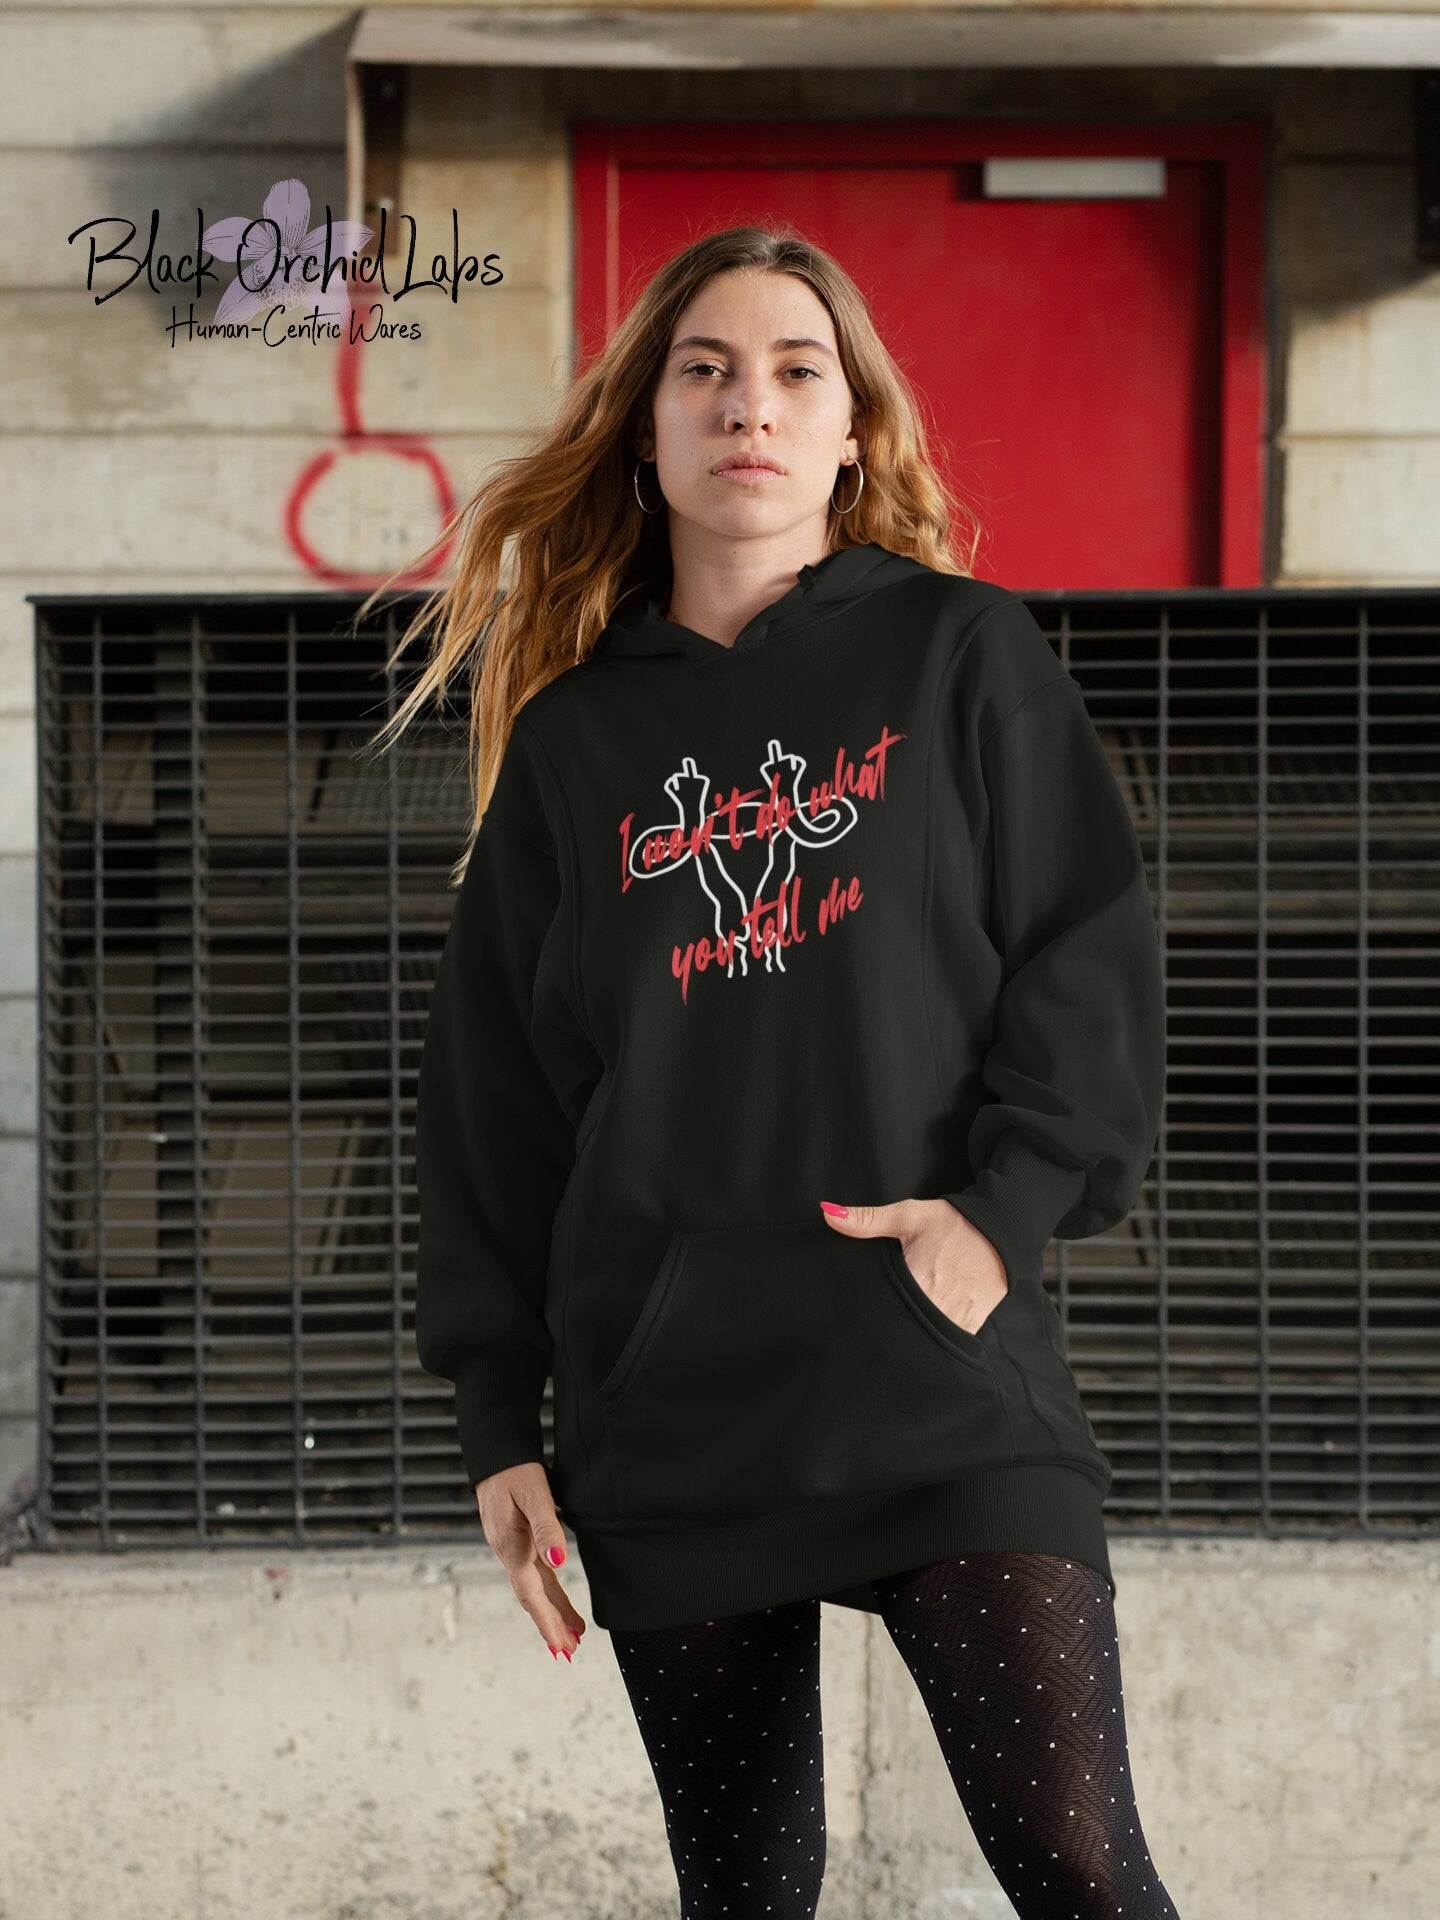 Women's Rights, Uterus, Angry Protest Hoodie, T Shirt, Pro Roe, Abortion Rights Support, Bella Canvas Ultra Premium, Reproductive Health